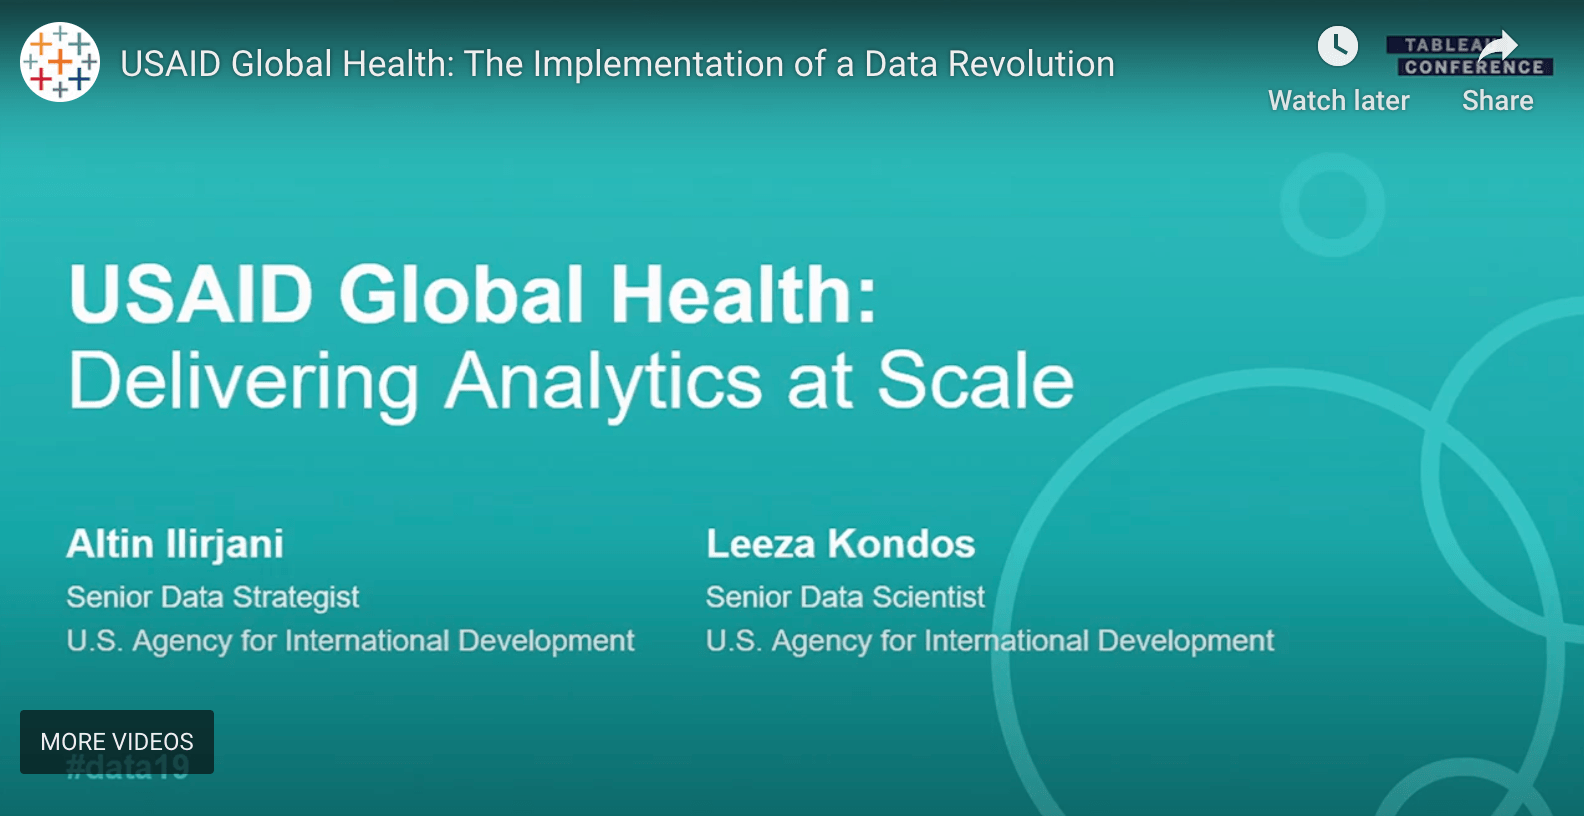 Navigate to USAID: Delivering Analytics at Scale